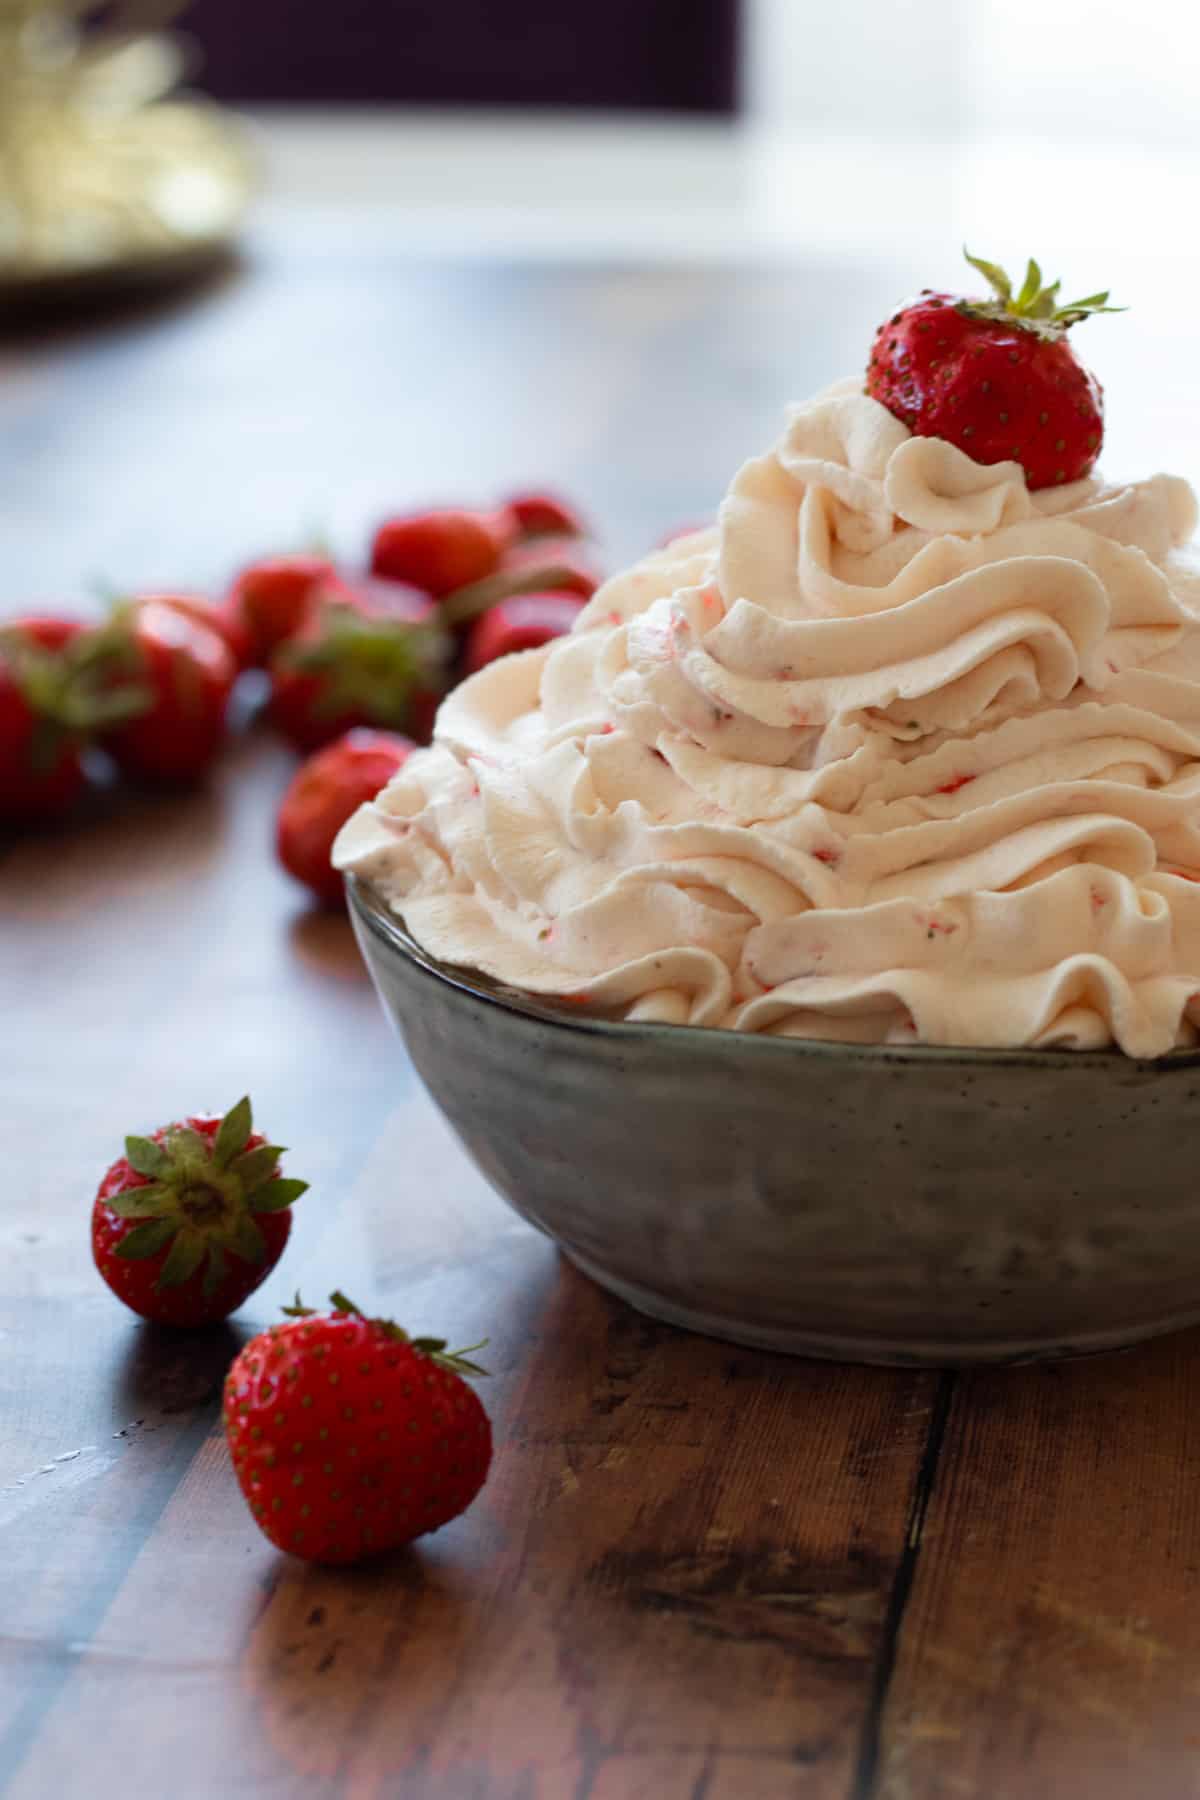 strawberry whipped cream in a bowl topped with a strawberry.